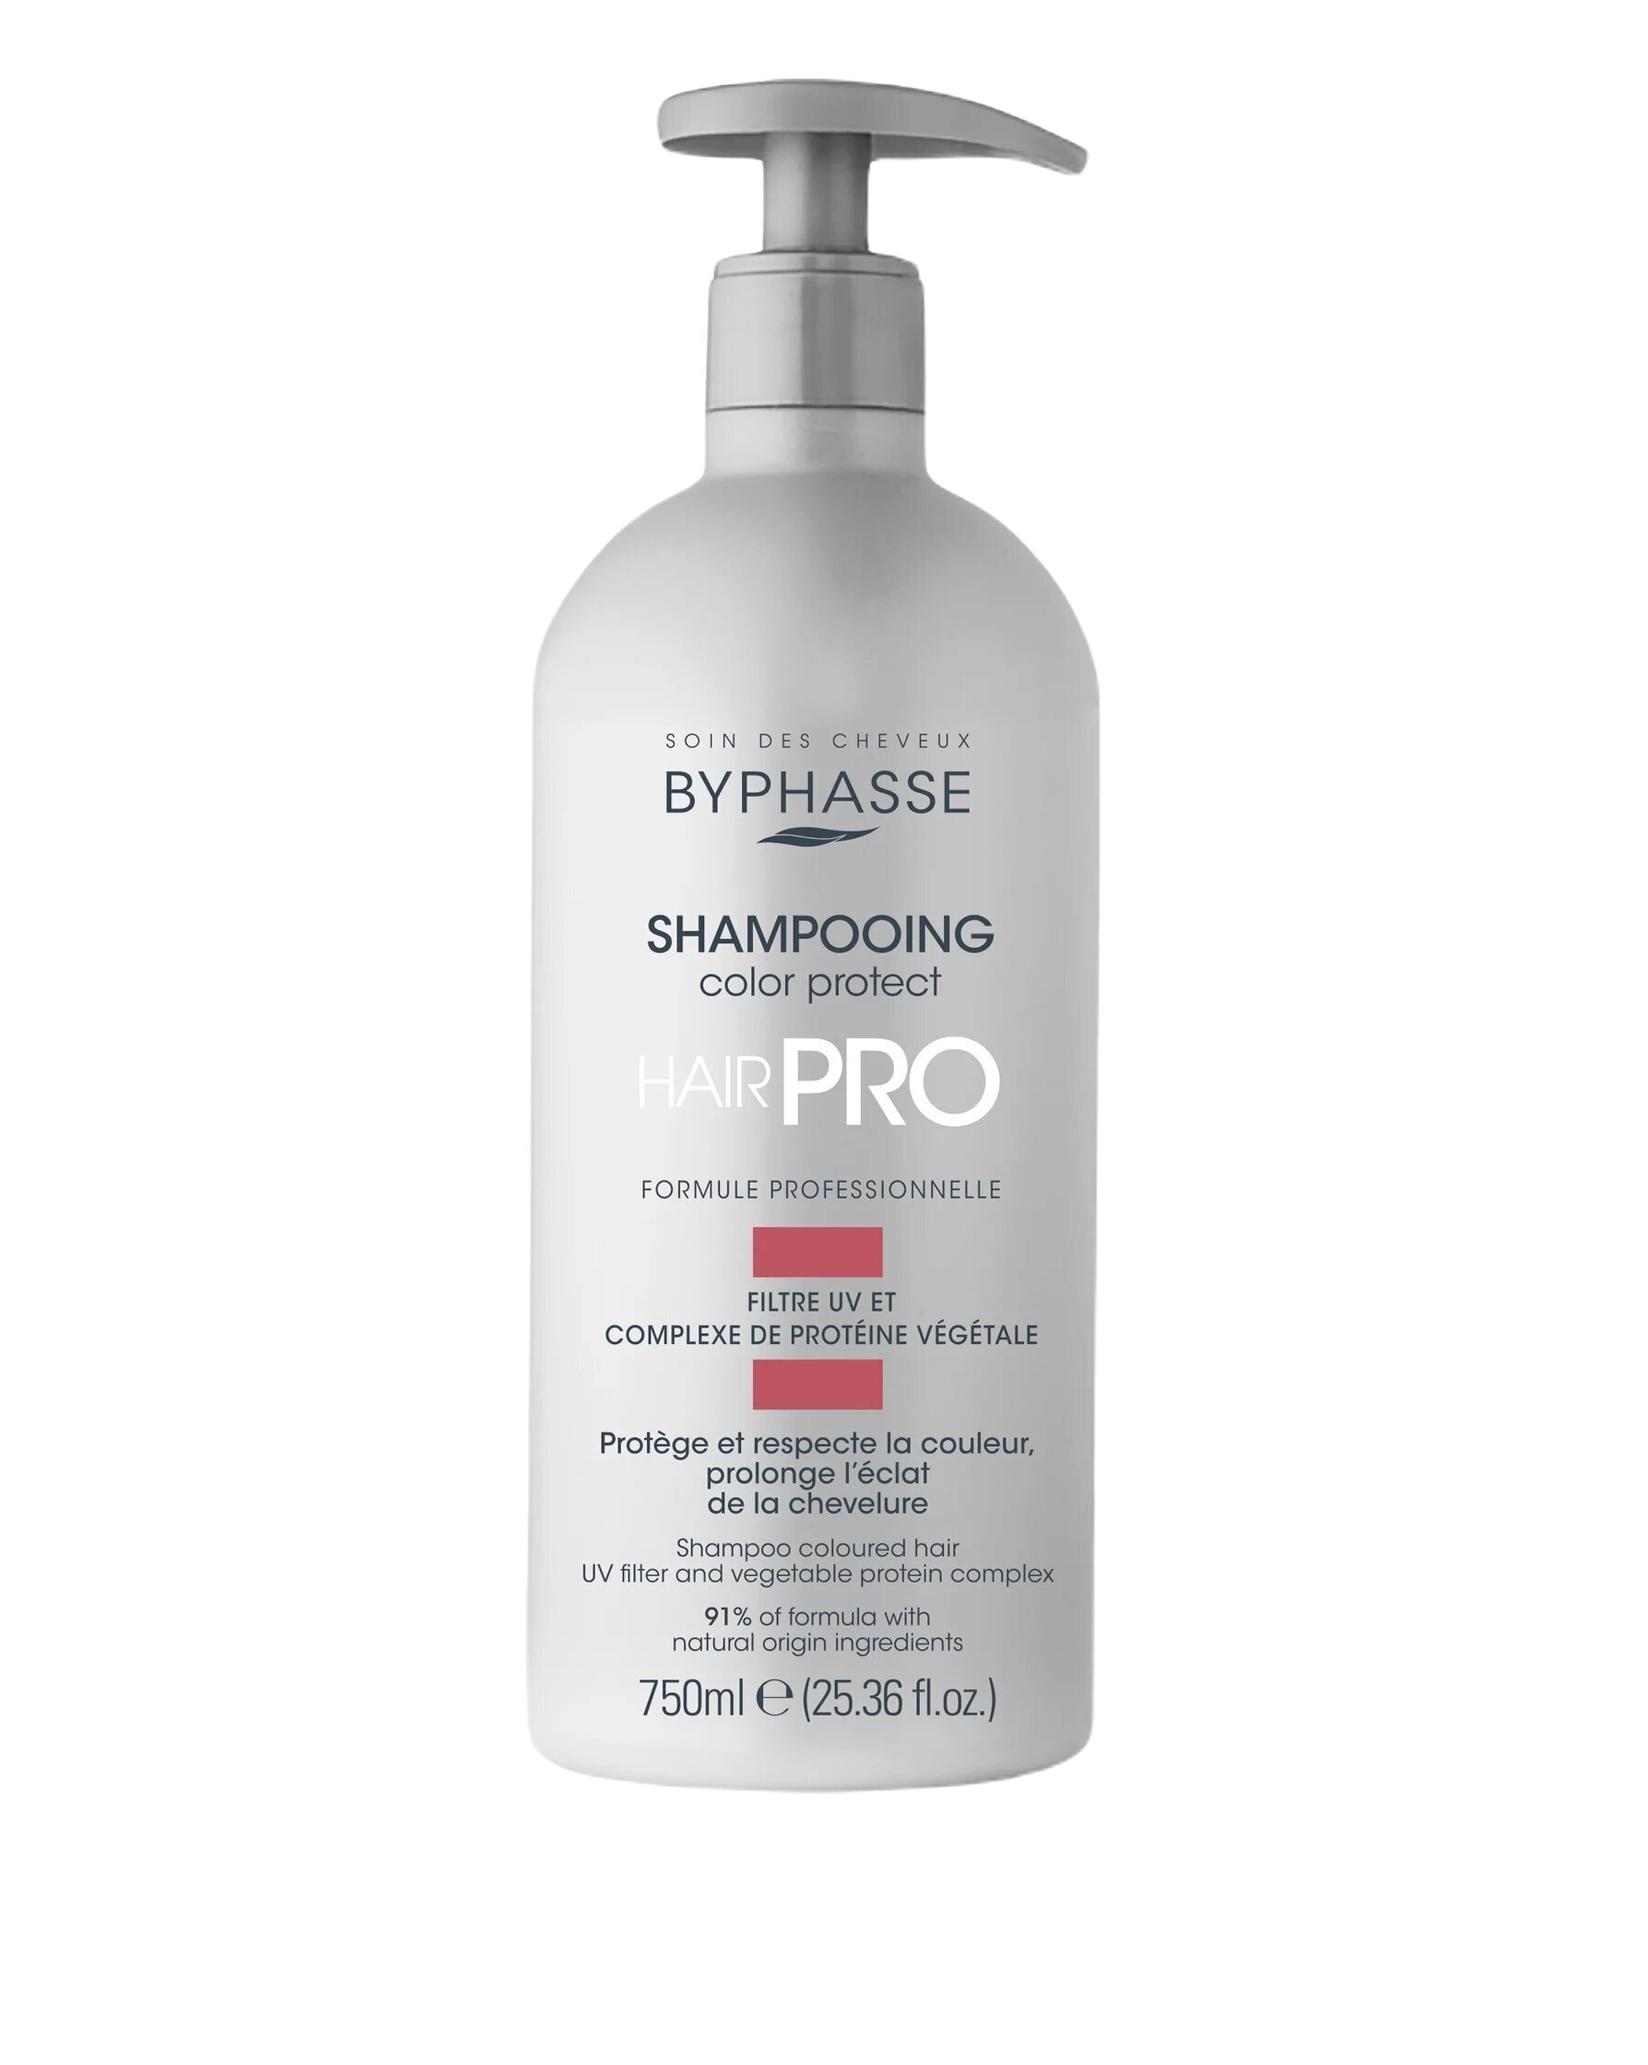 Selected image for BYPHASSE HAIR PRO Šampon za farbanu kosu Color Protect 750ml